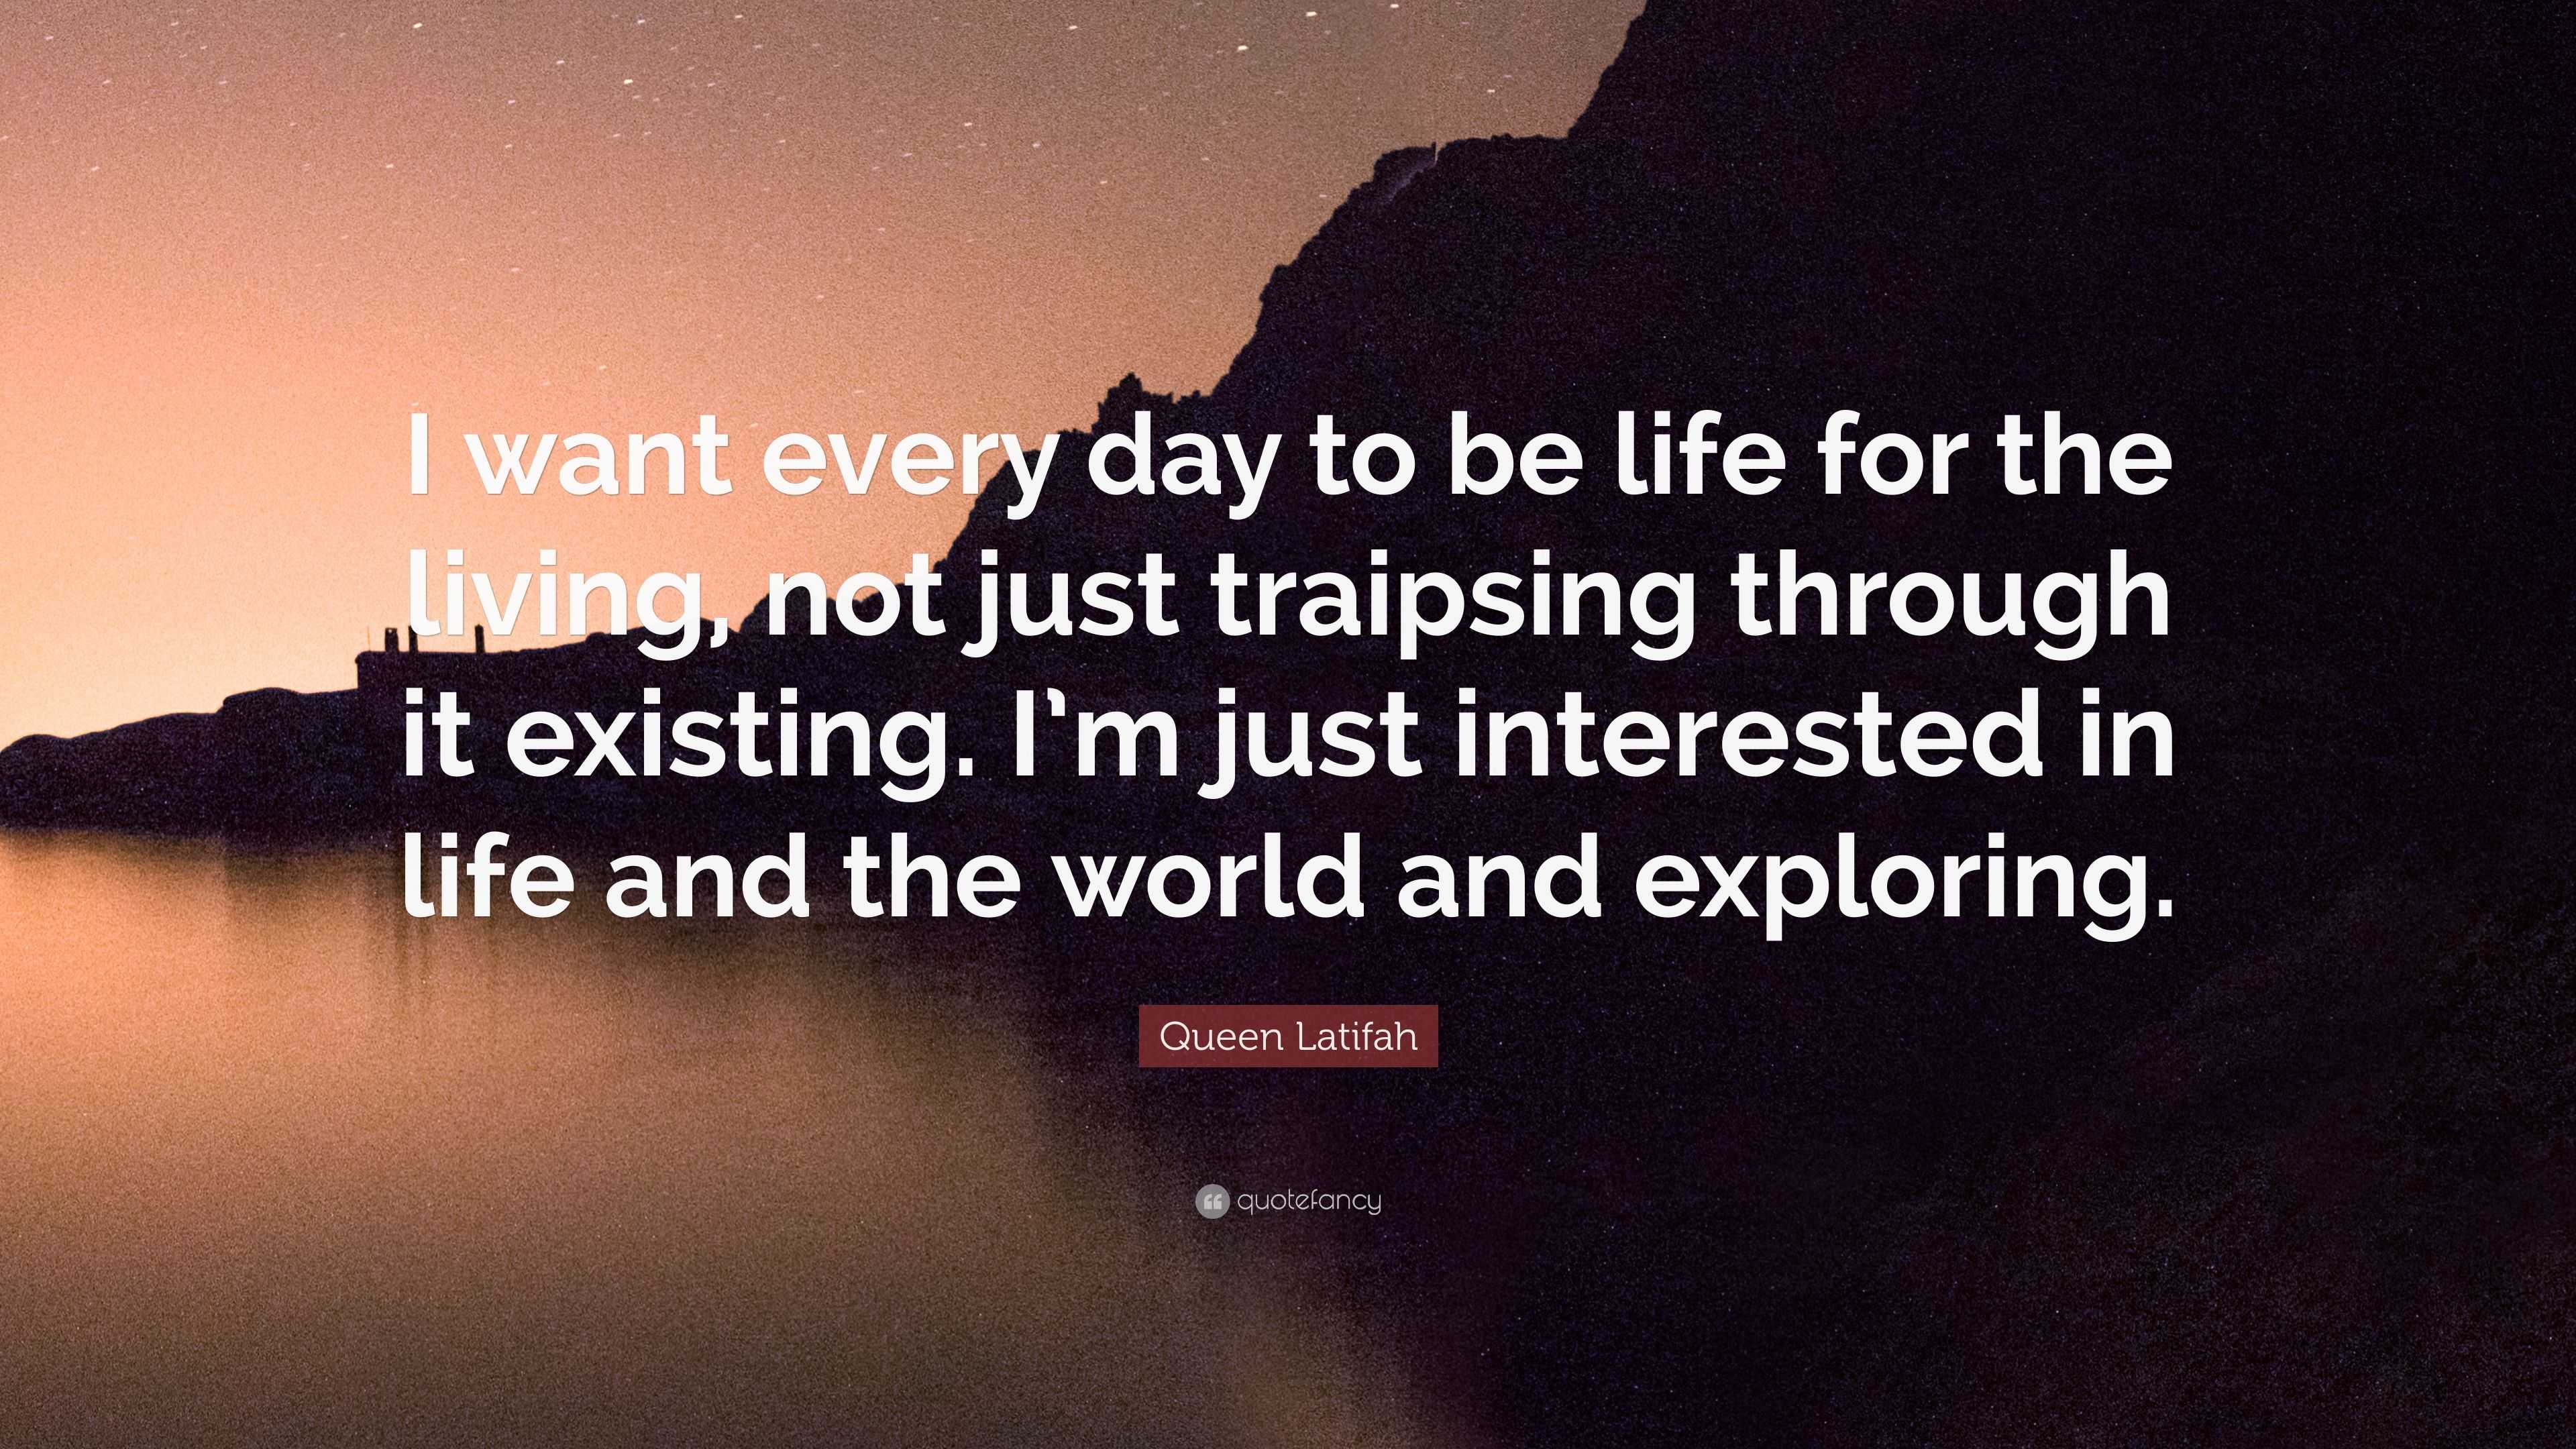 Queen Latifah Quote: “I Want Every Day To Be Life For The Living, Not Just Traipsing Through It Existing. I'm Just Interested In Life And The ...”